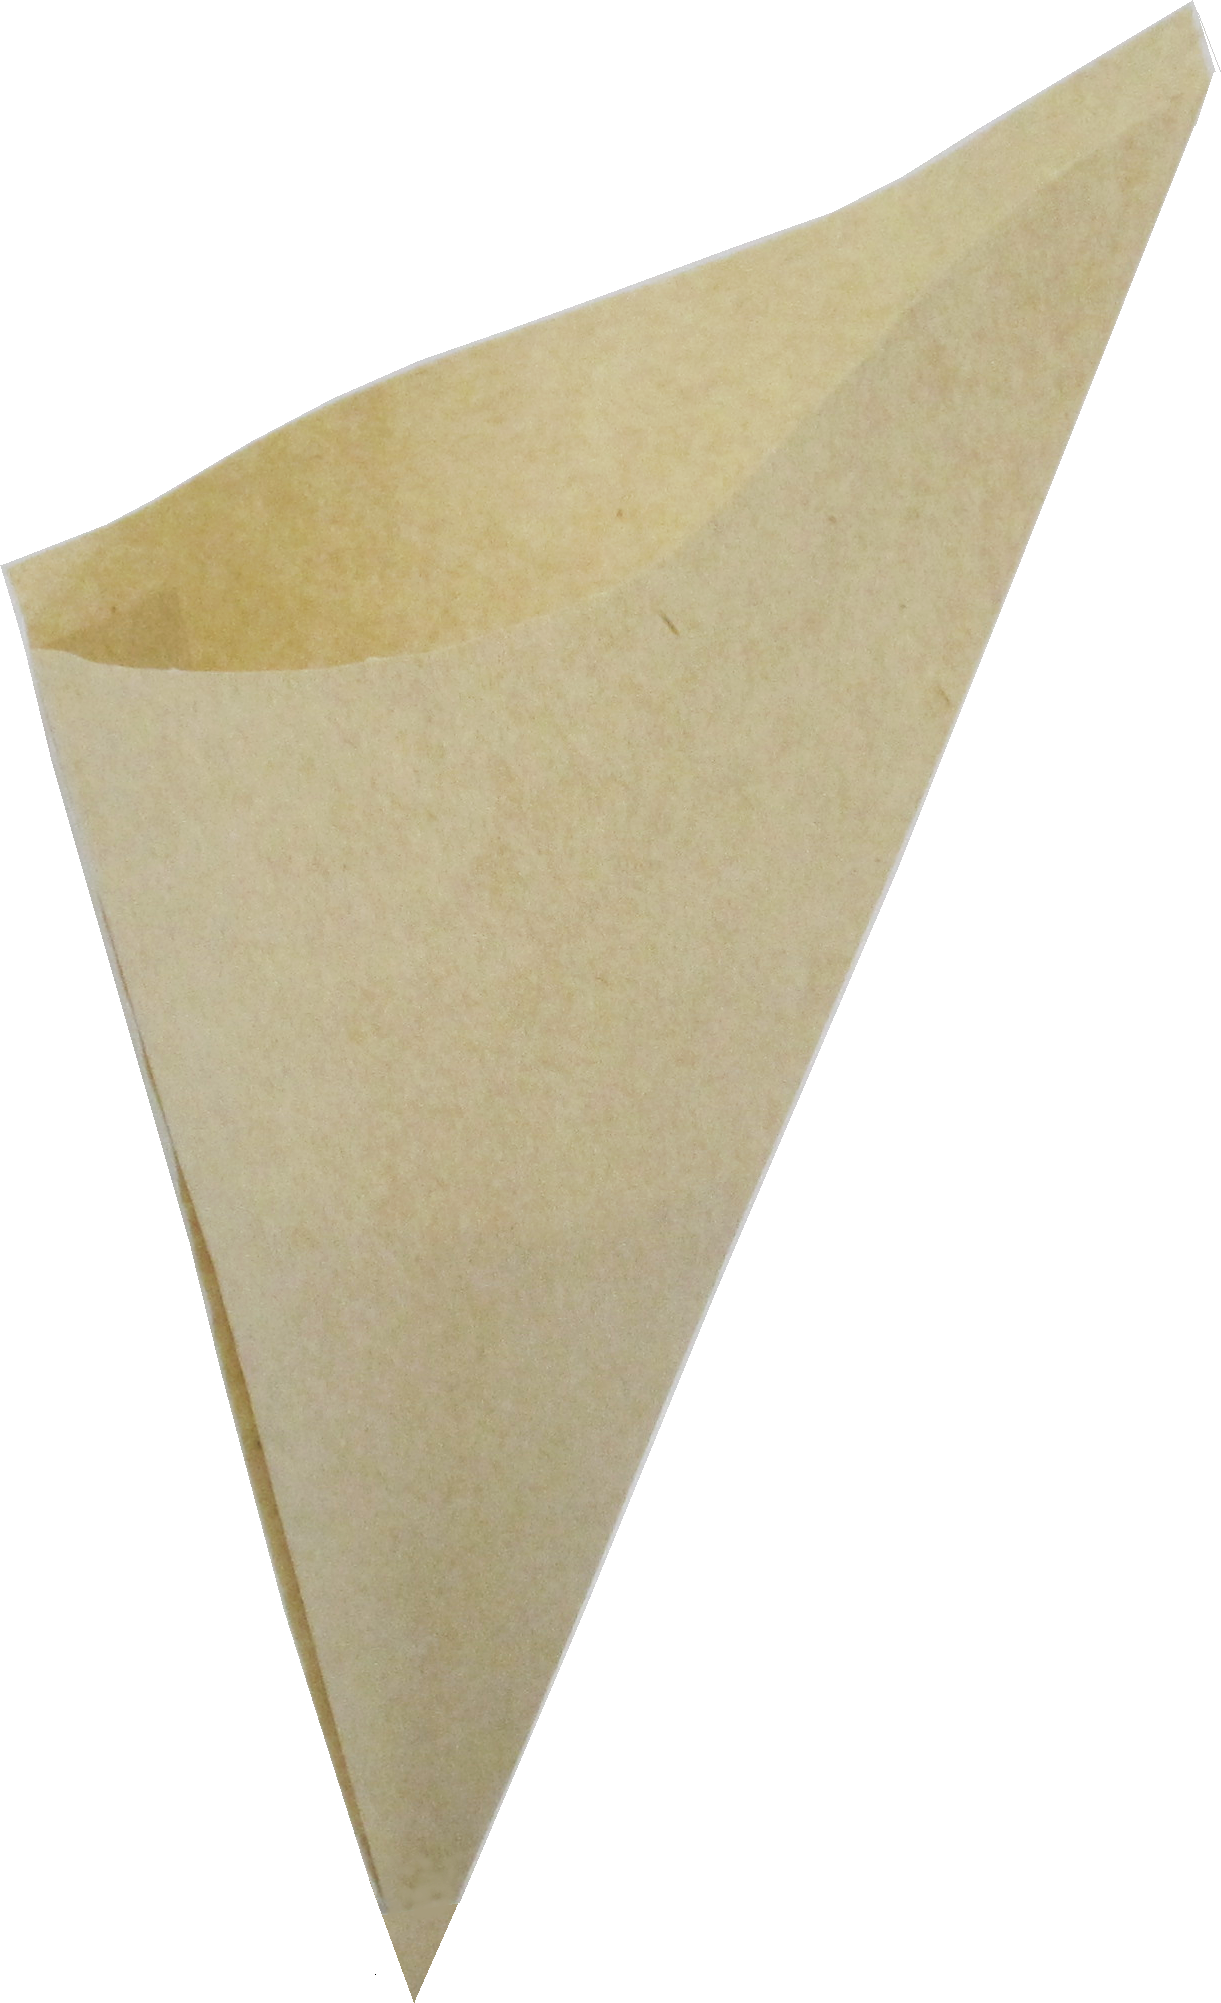 Small K-15 Eco Friendly Paper Cones, Holds 6.5 Oz.